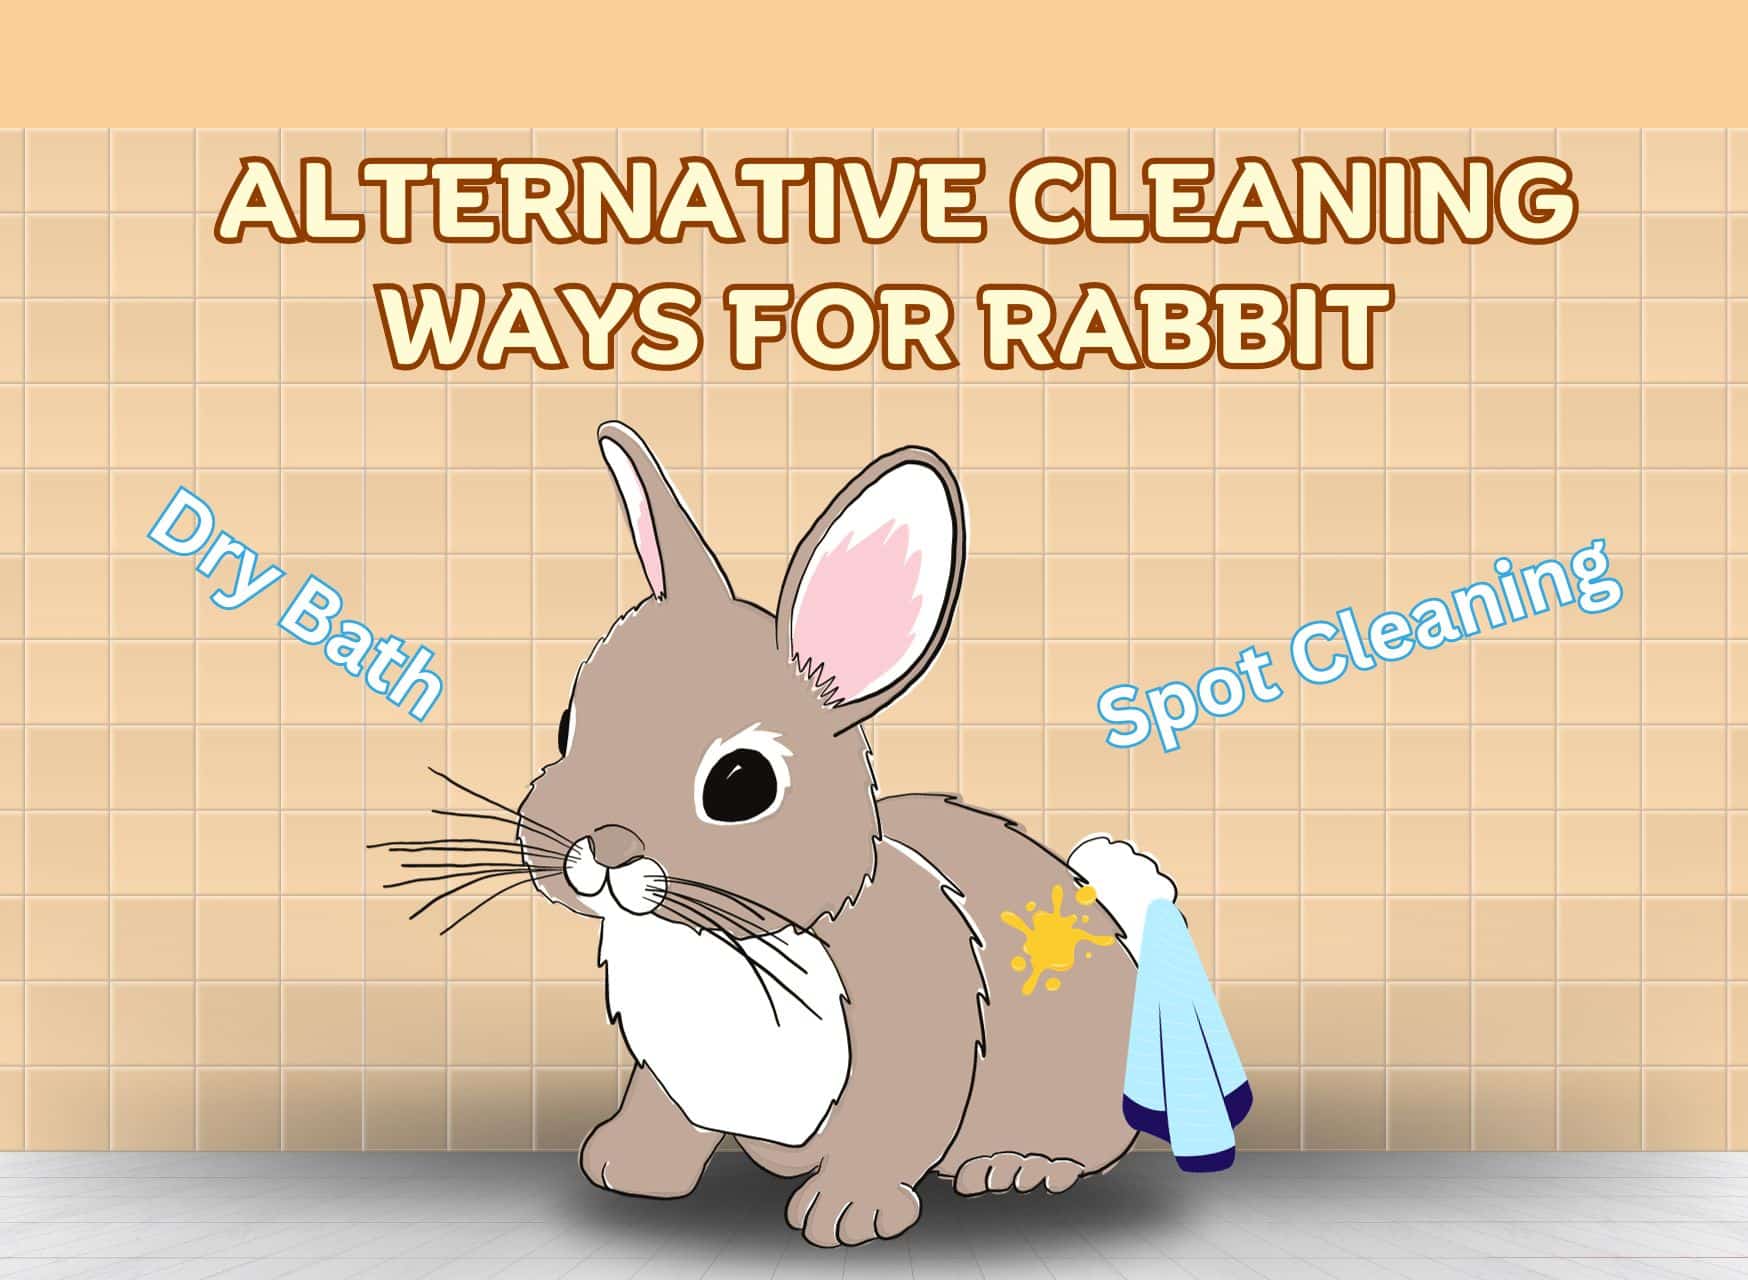 How To Bathe A Rabbit, Spot Cleaning, Dry Bath